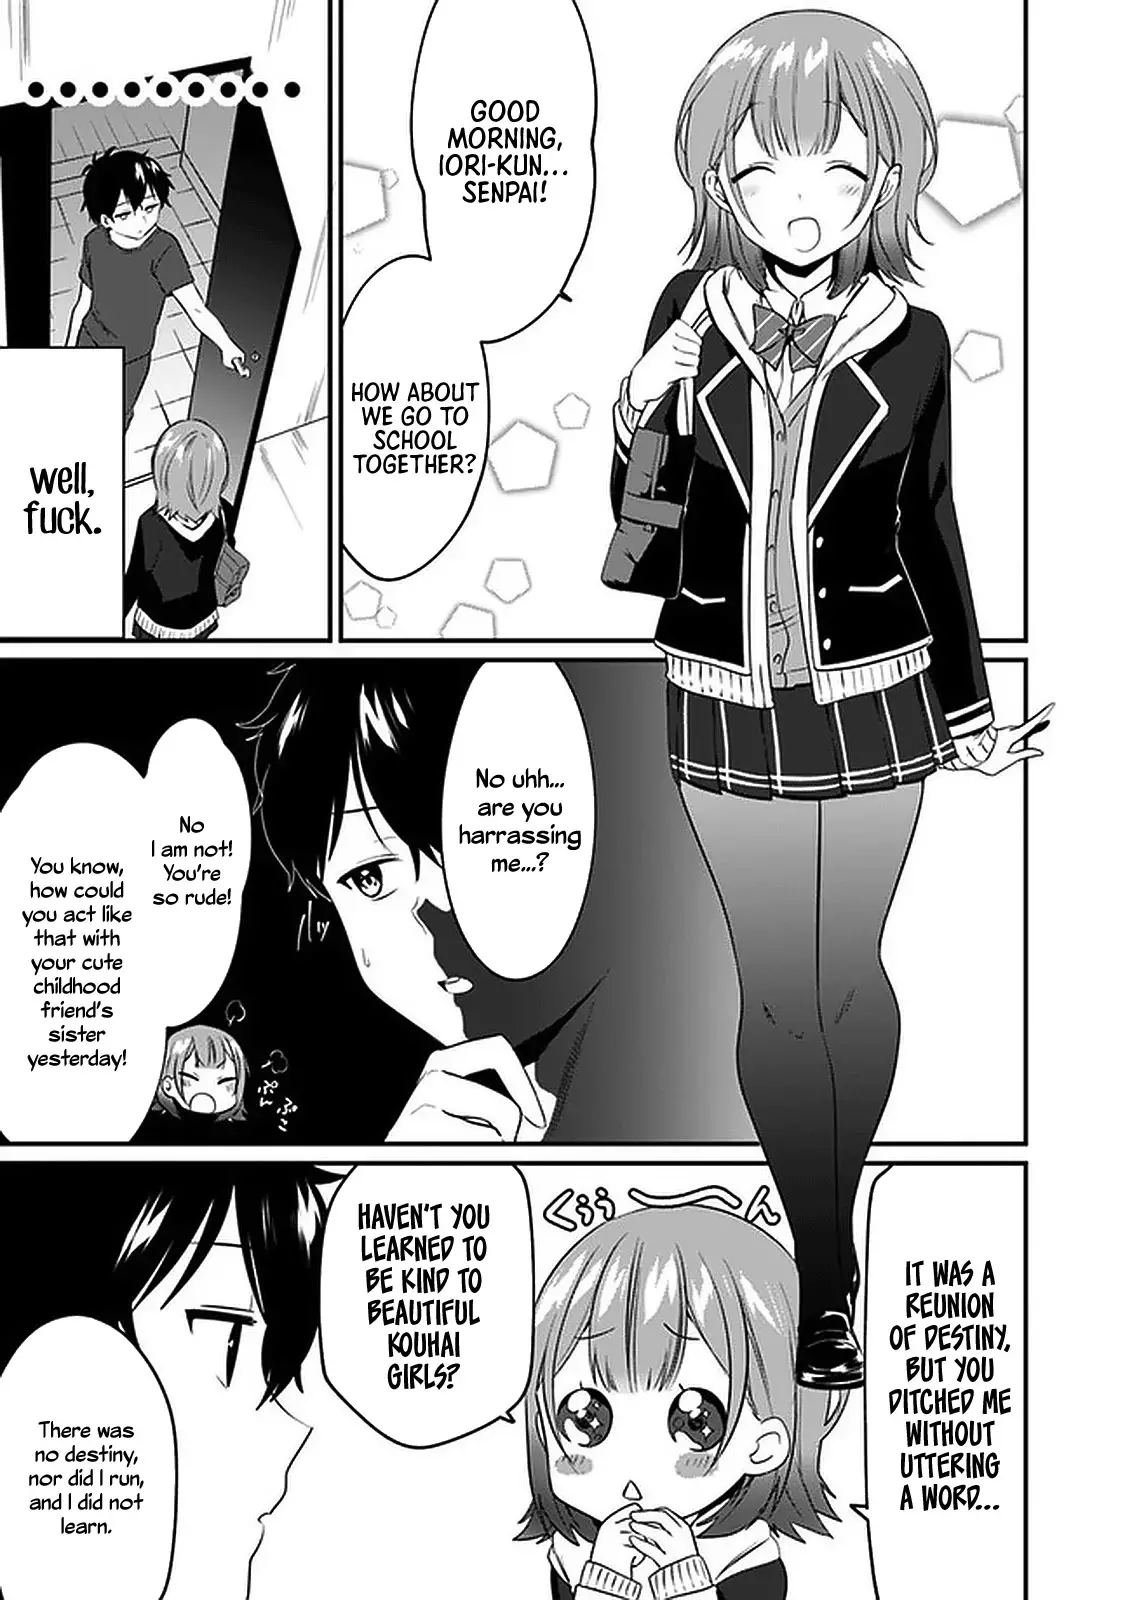 Right Now, She's Still My Childhood Friend's Sister. - 1 page 29